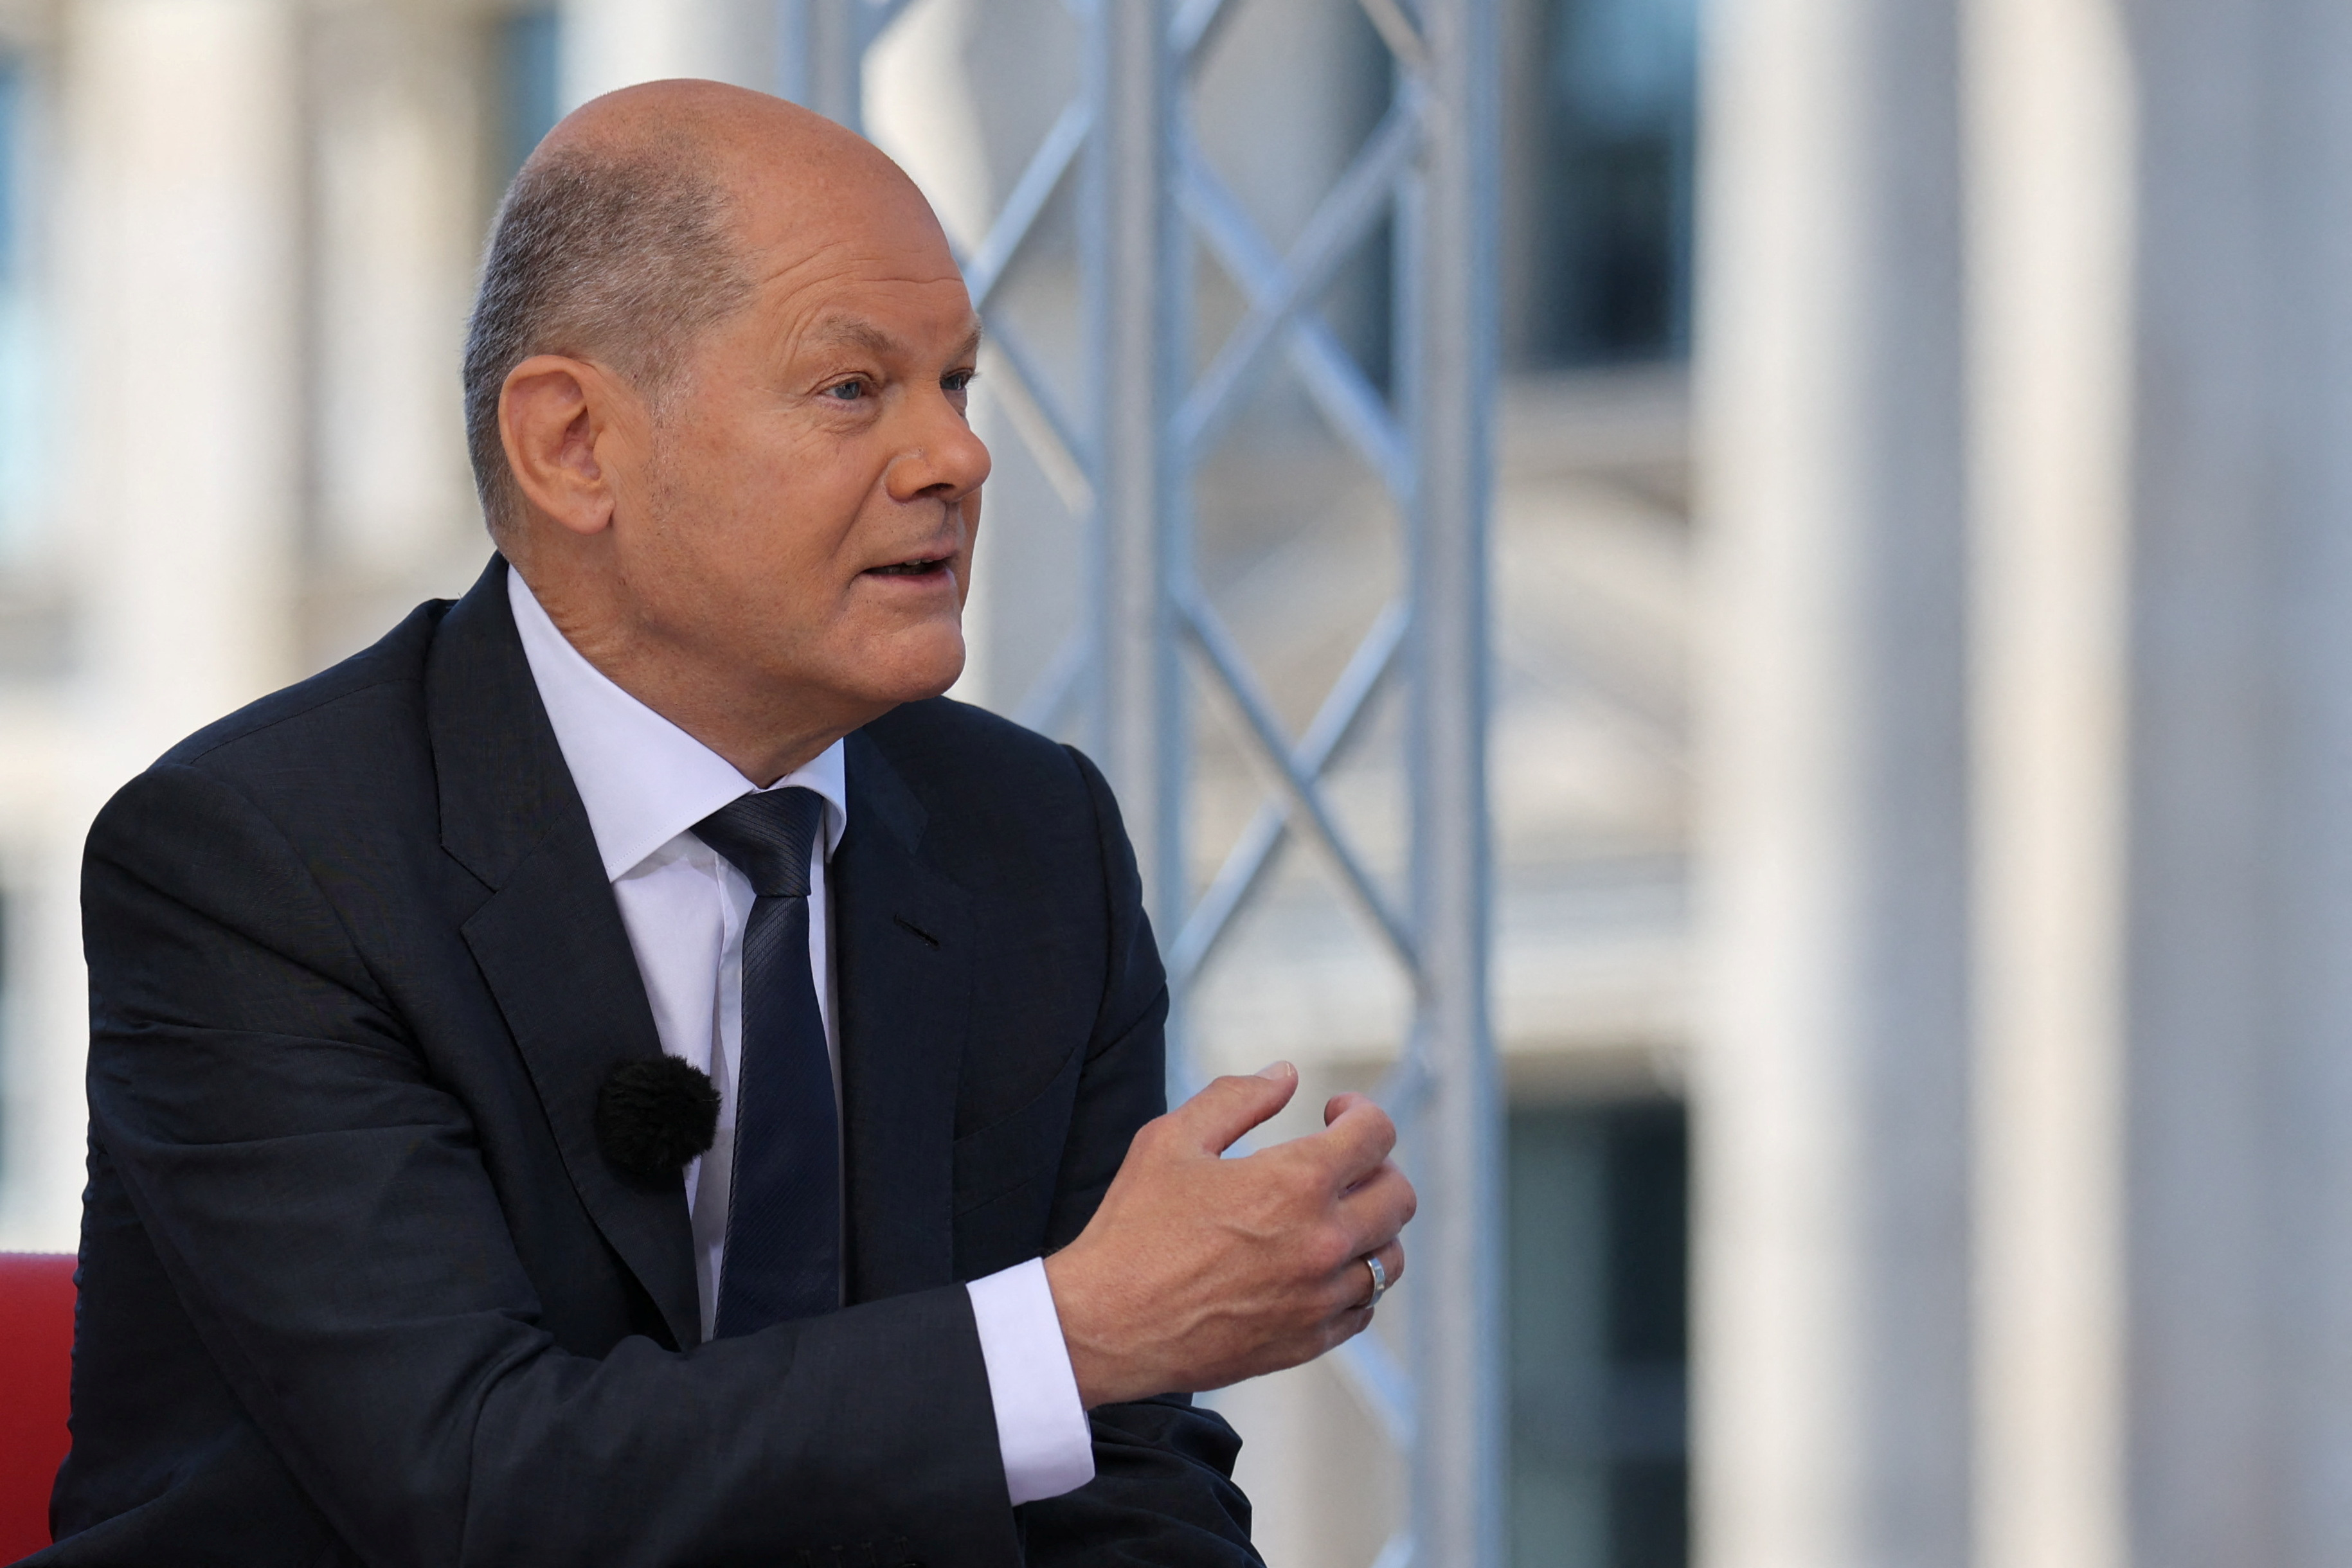 German Chancellor Olaf Scholz attends the ARD Sommerinterview in Berlin